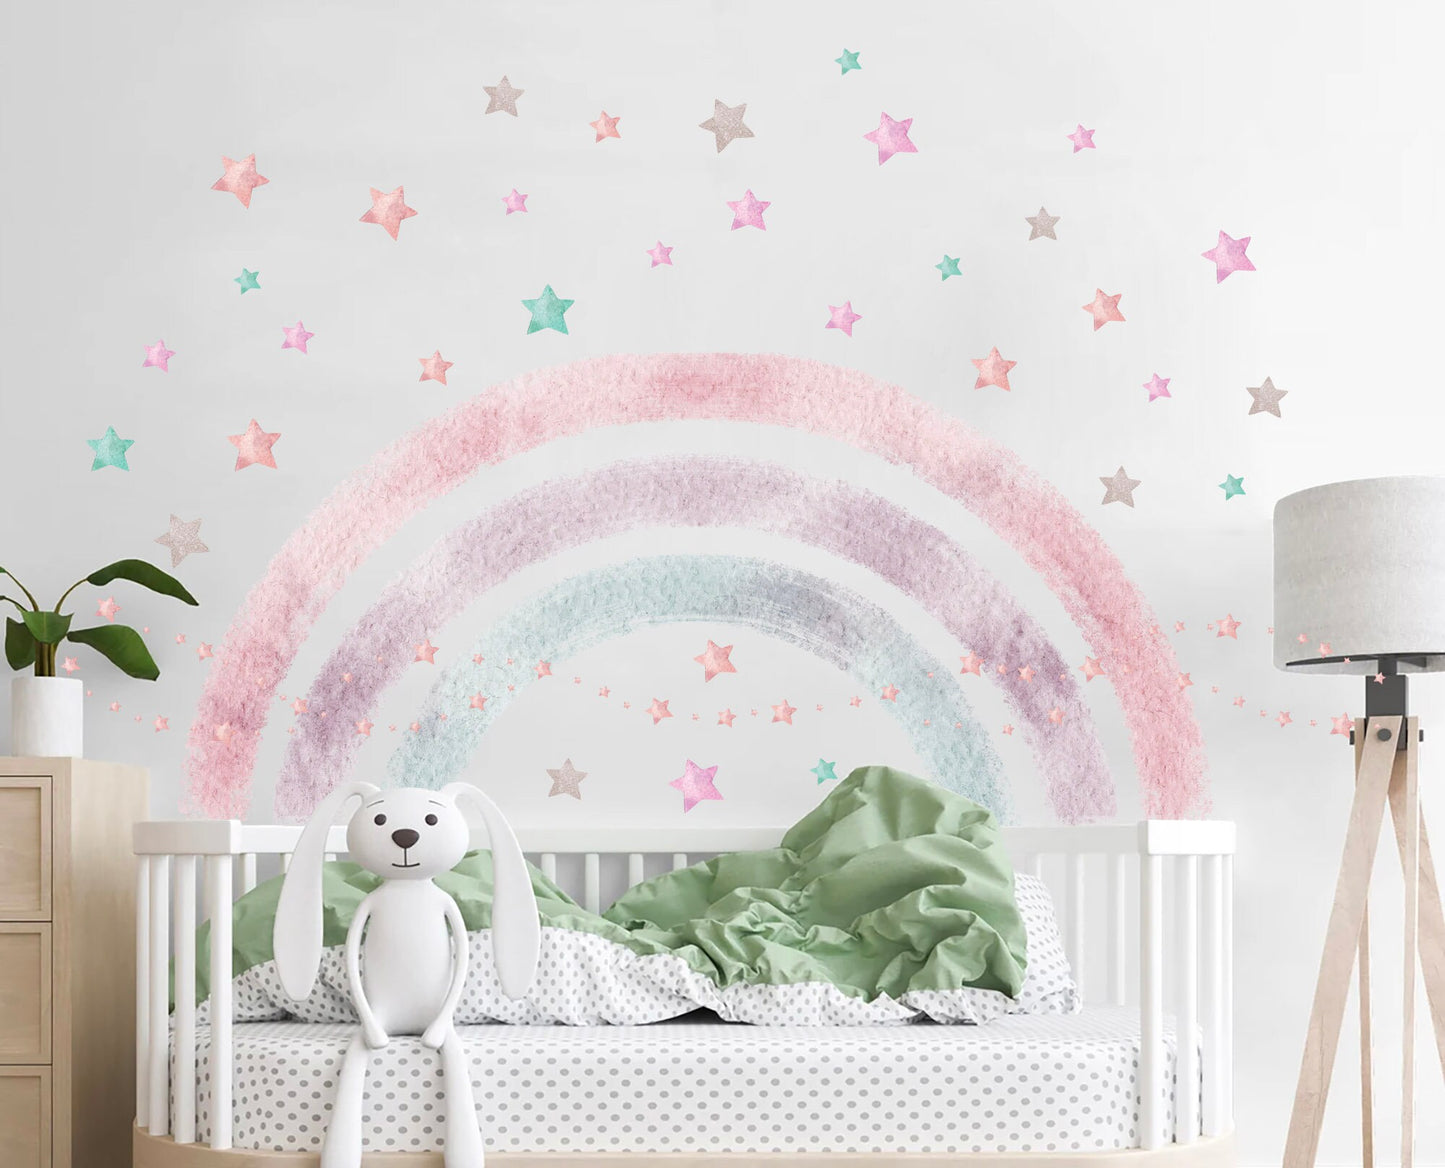 Rainbow Star over Bed Removable Wall Fabric Decal - Girl Room Decor Gift - BR374